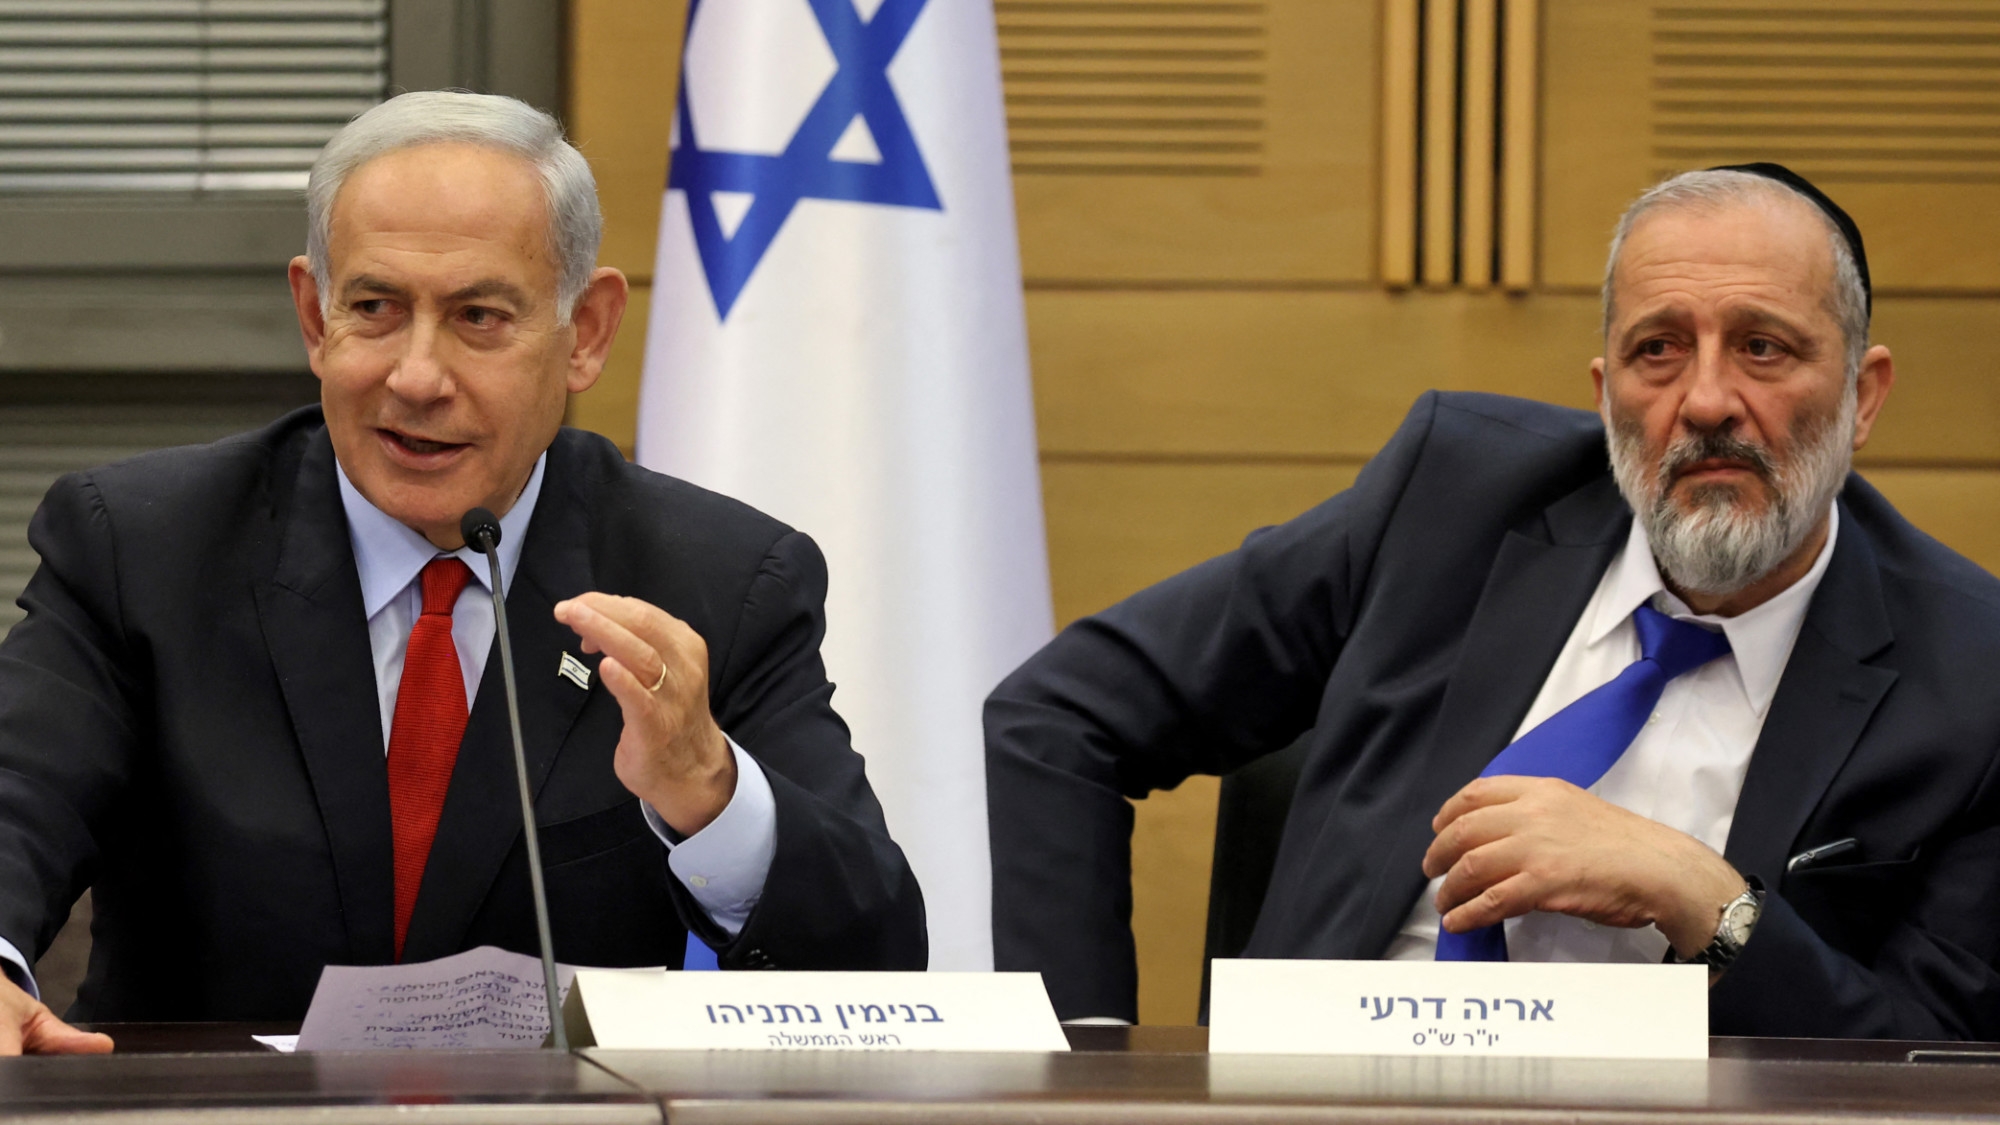 Israeli Prime Minister Benjamin Netanyahu (L) and Aryeh Deri, chairman of the Shas party, at a media briefing on 23 M, 2023, at the parliament in Jerusalem (AFP)